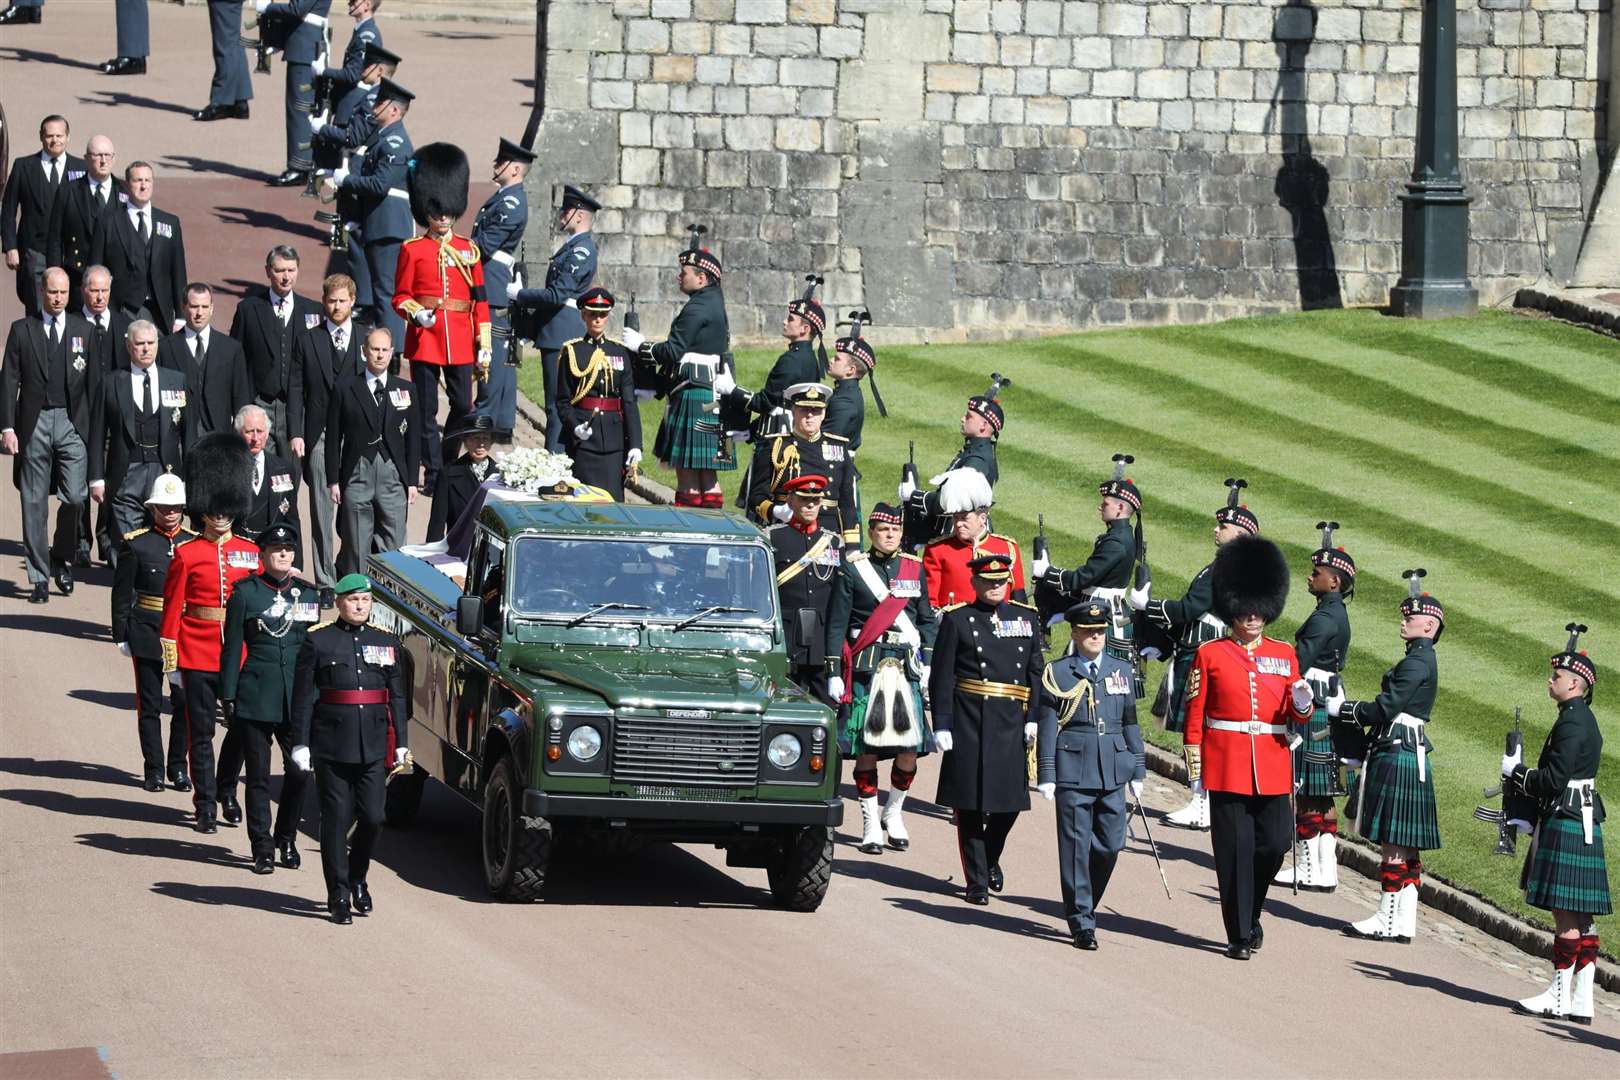 The Duke Of Edinburgh's funeral took place at Windsor Castle on April 17. More than 730 members of Armed Forces personnel took part in the ceremony